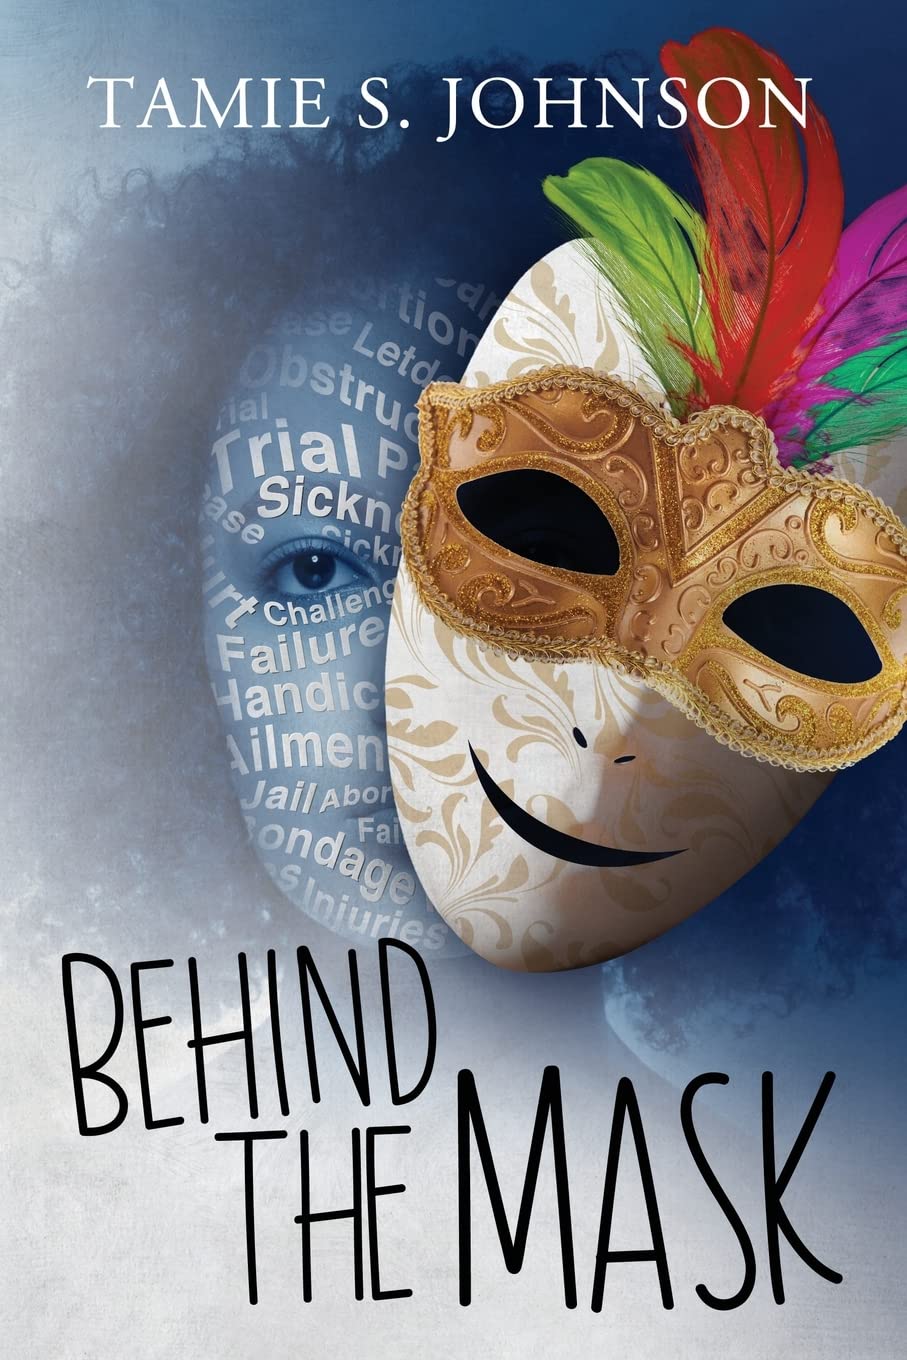 Author's Tranquility Press presents "Behind the Mask" by Tamie S. Johnson  